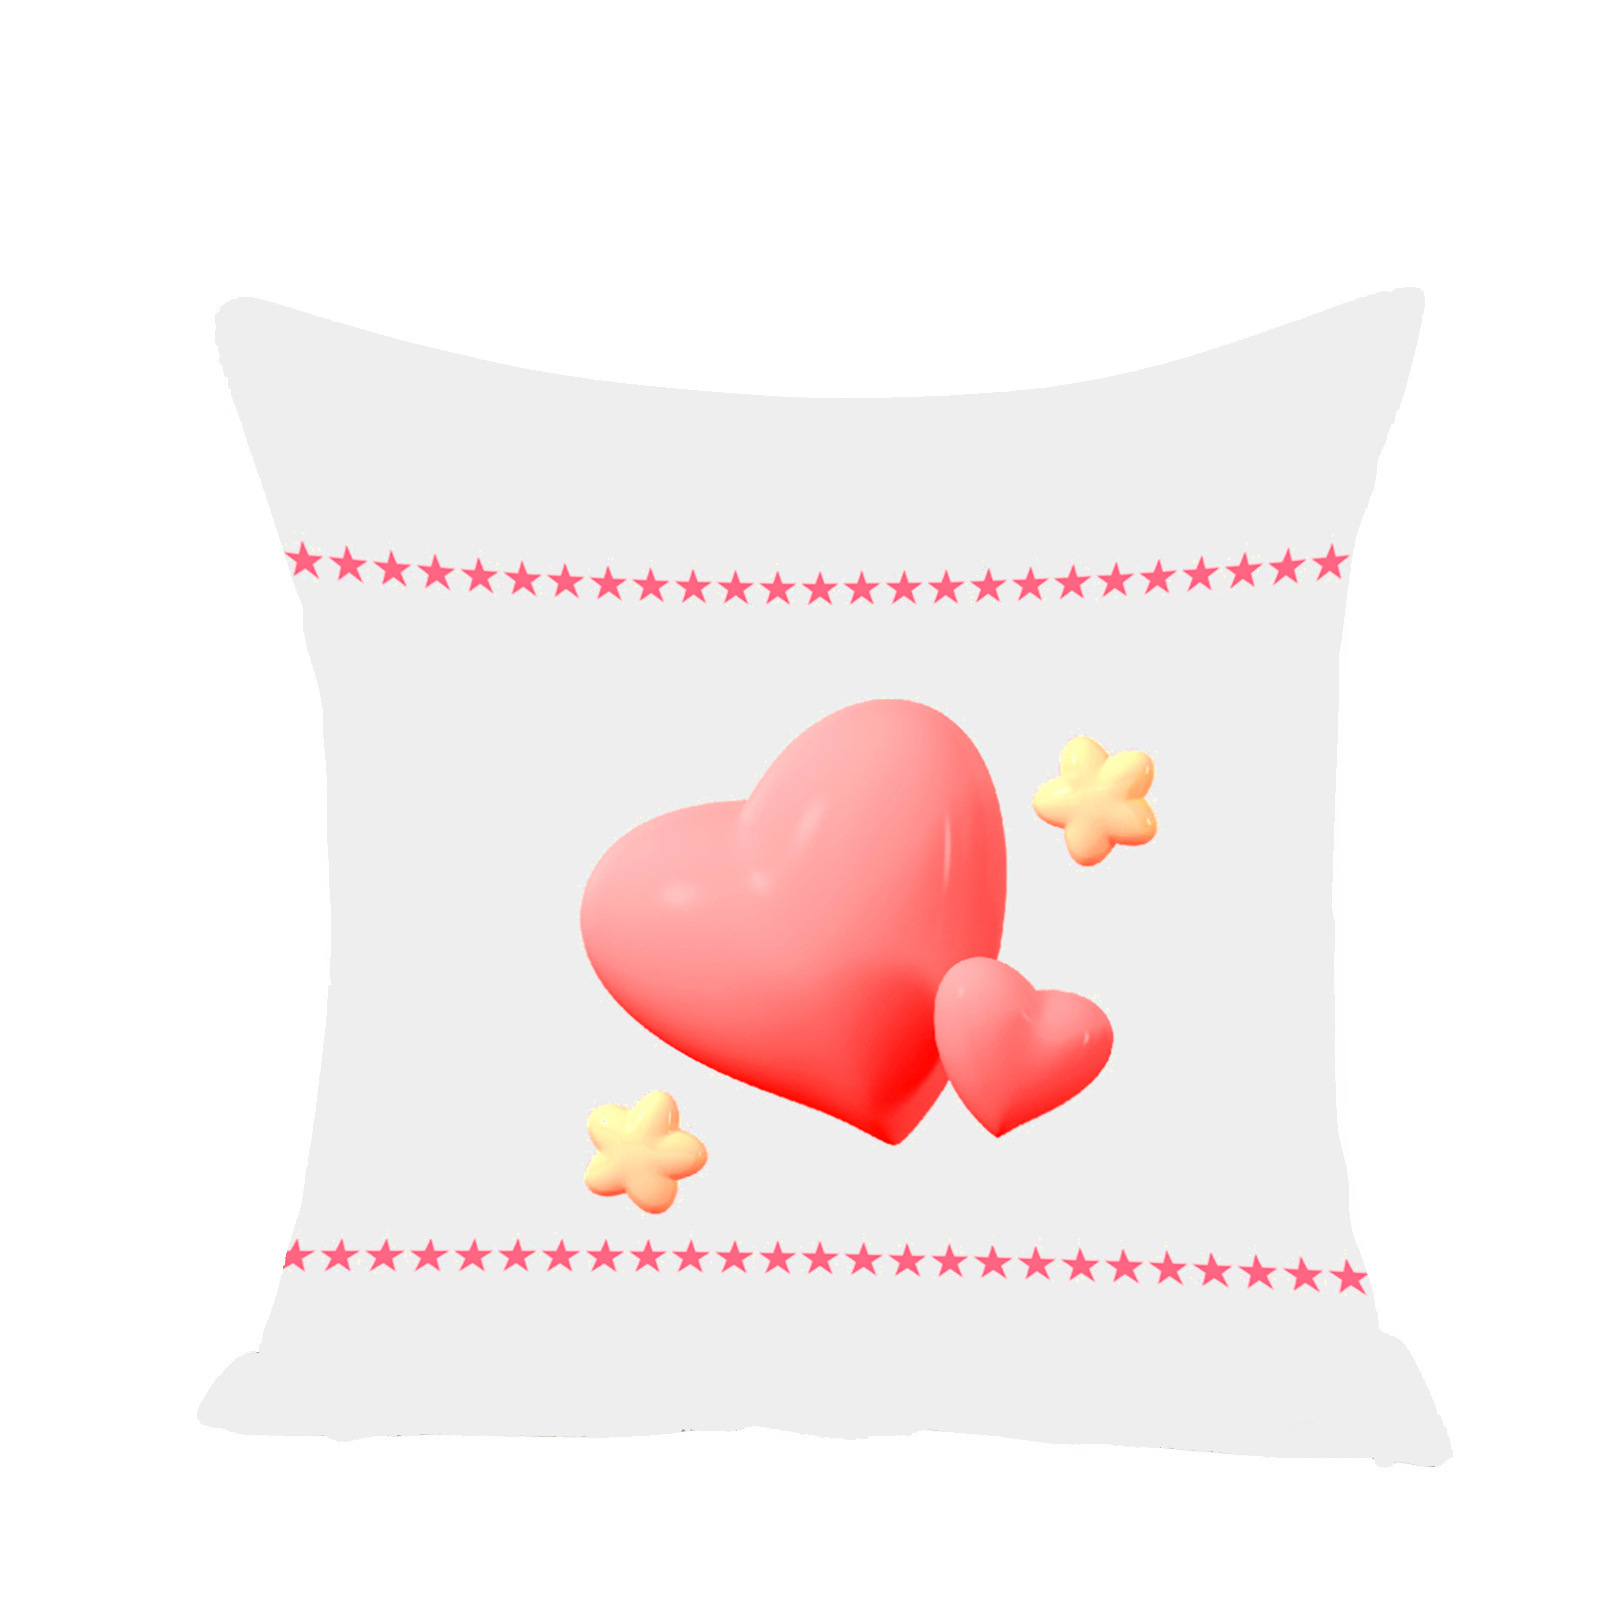 [Clothes] Hot Sale Valentine's Day Pillow Cover Amazon Home Cushion Office Bedroom and Living Room Decoration Pillowcase